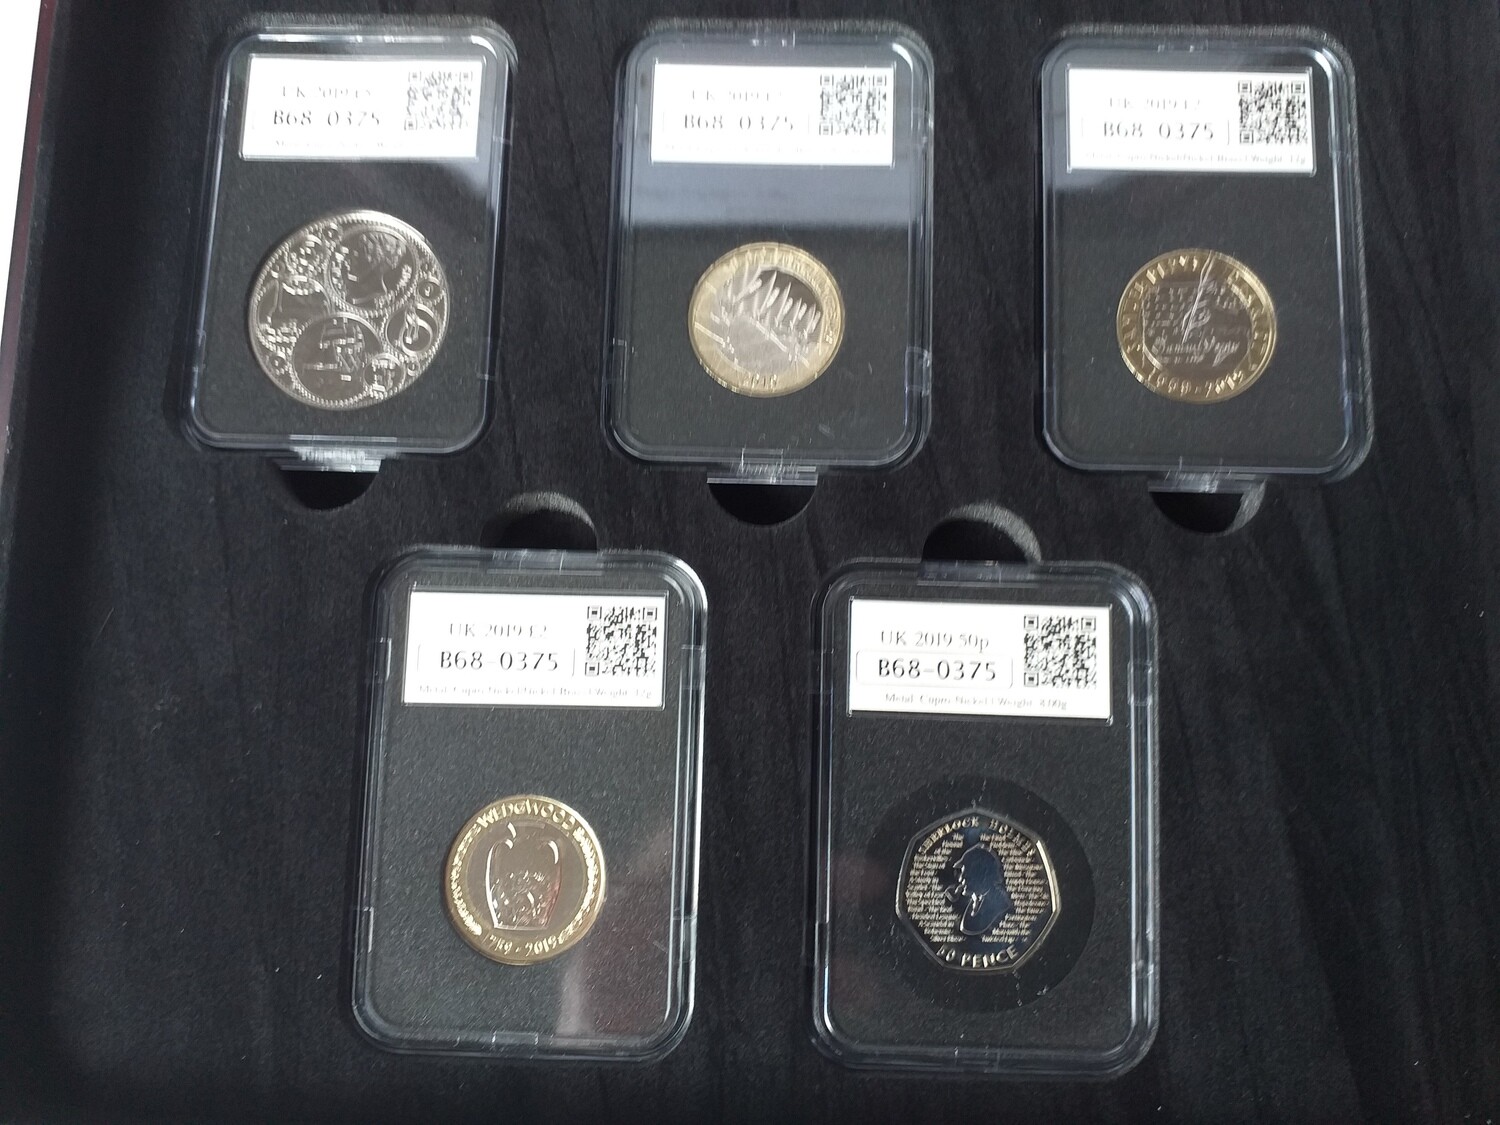 2019 - Date Stamp Coin Set